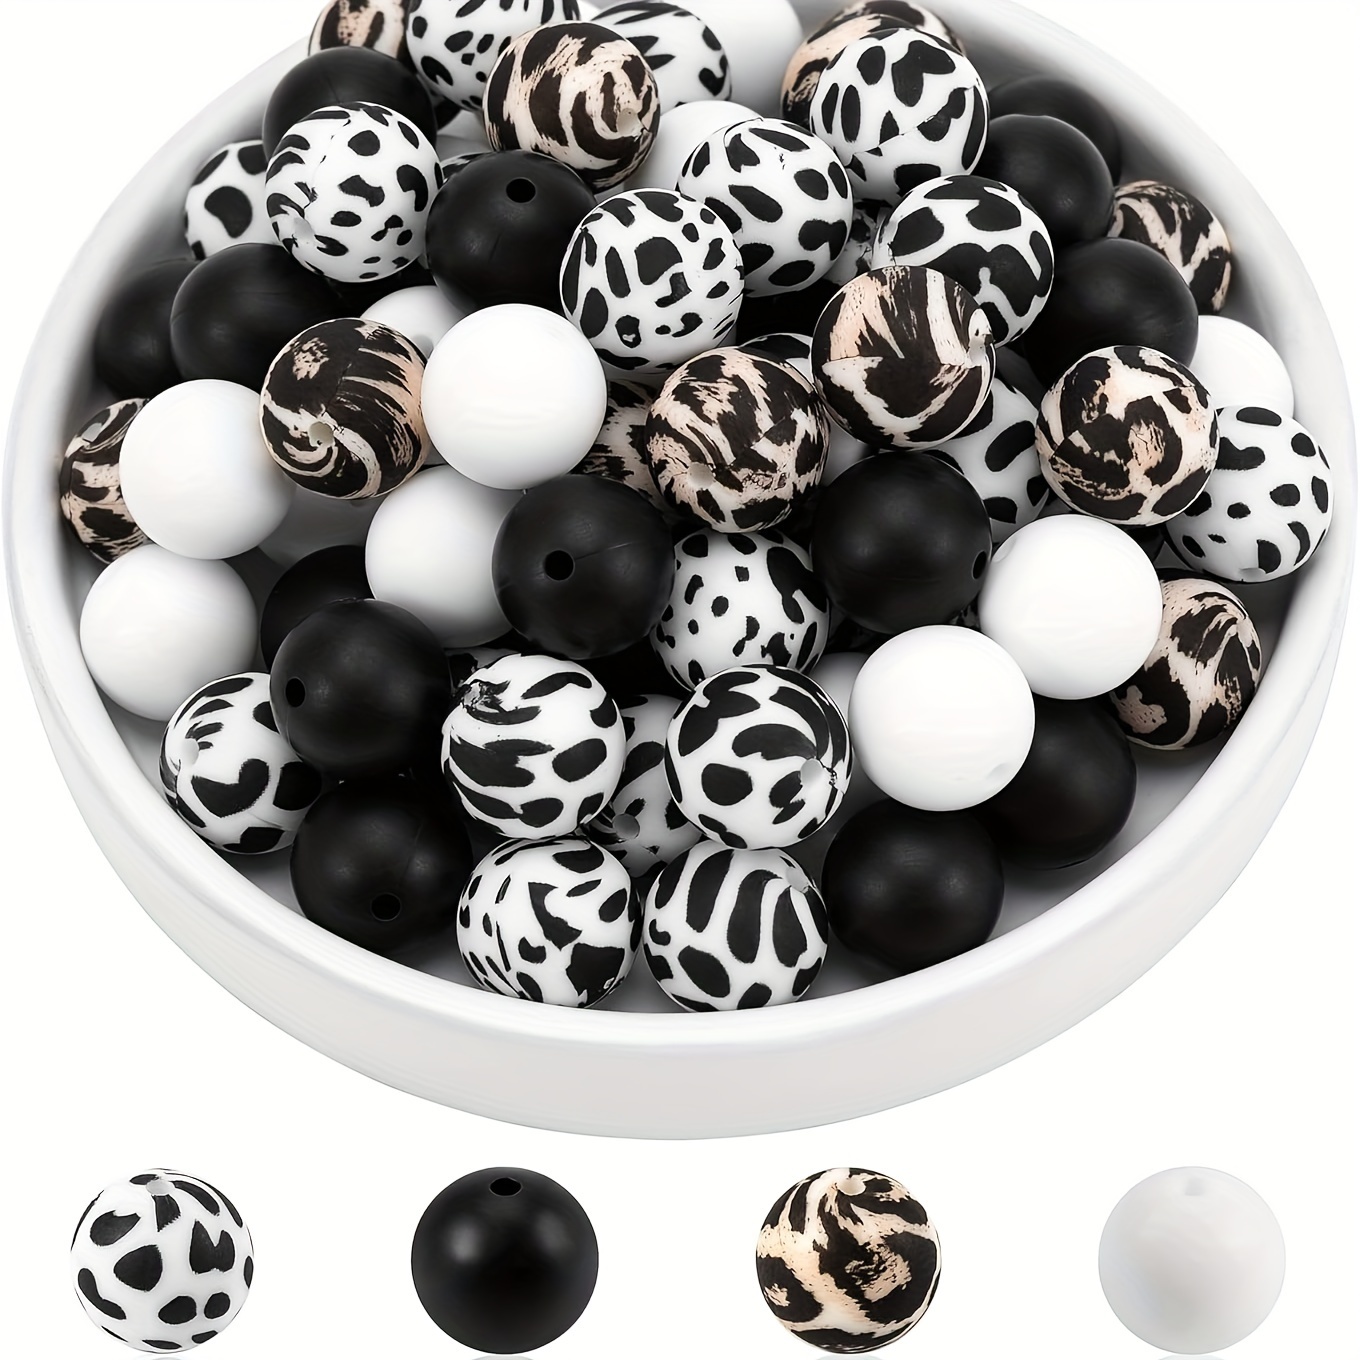 

100pcs Silicone Beads 15mm For Keychain Making, Leopard Cow Black White Color Silicone Round Beads Bulk For Diy Necklace Bracelet Jewelry Making